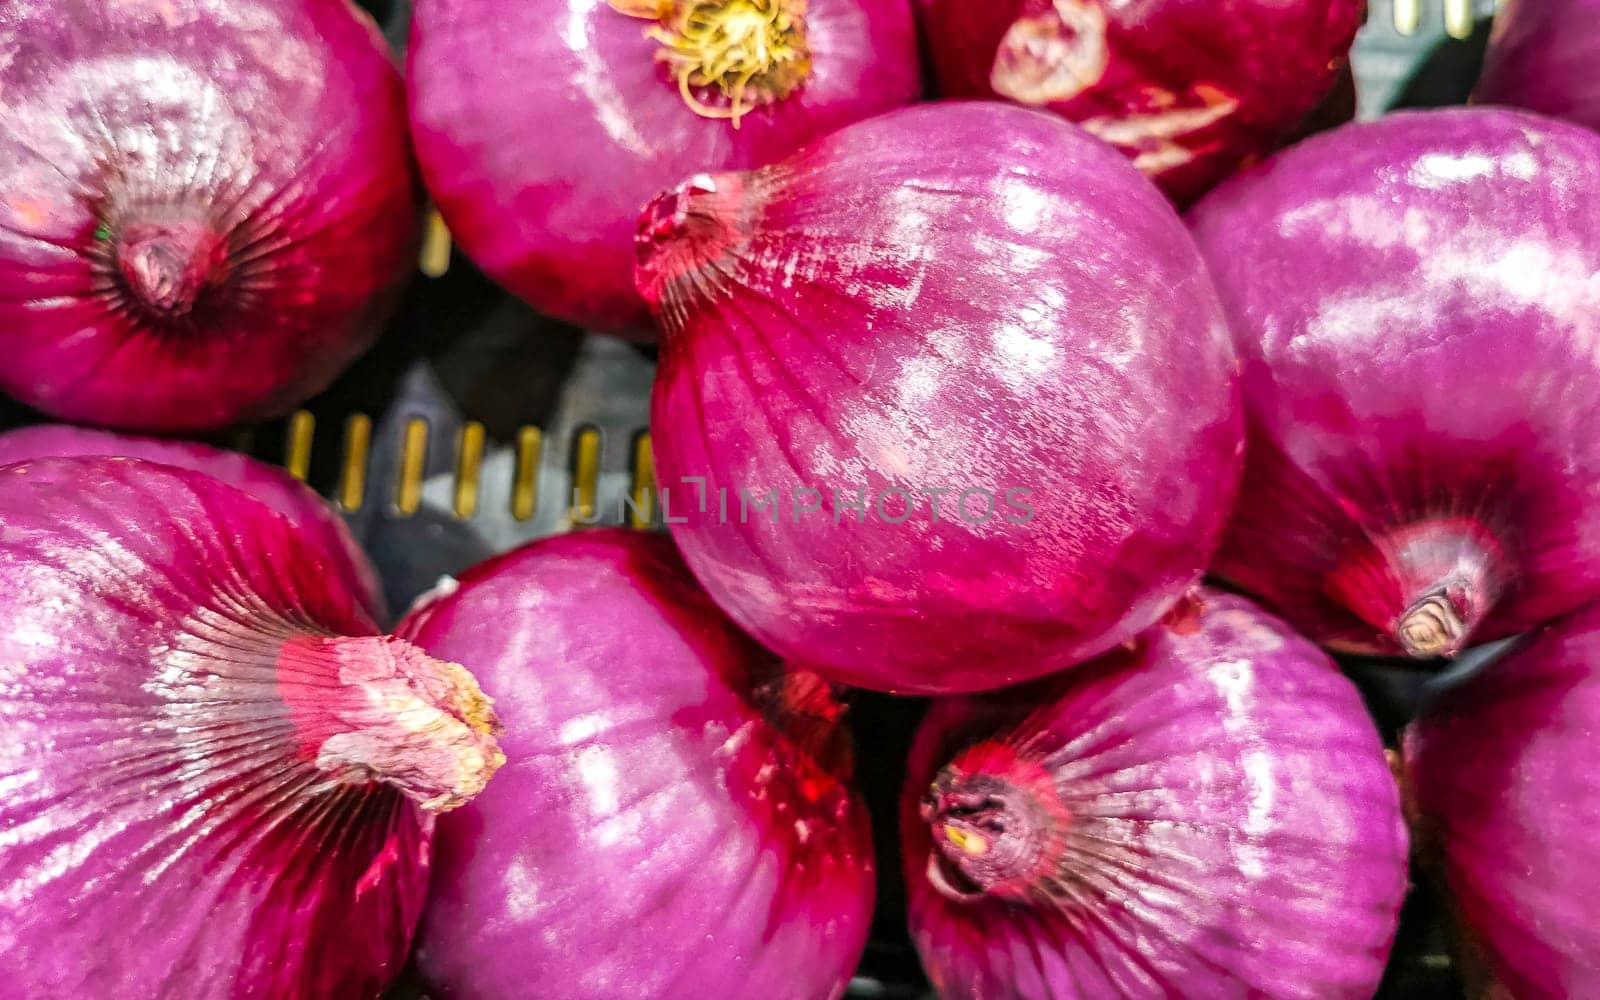 Onions onion red purple and white vegetables on the market by Arkadij